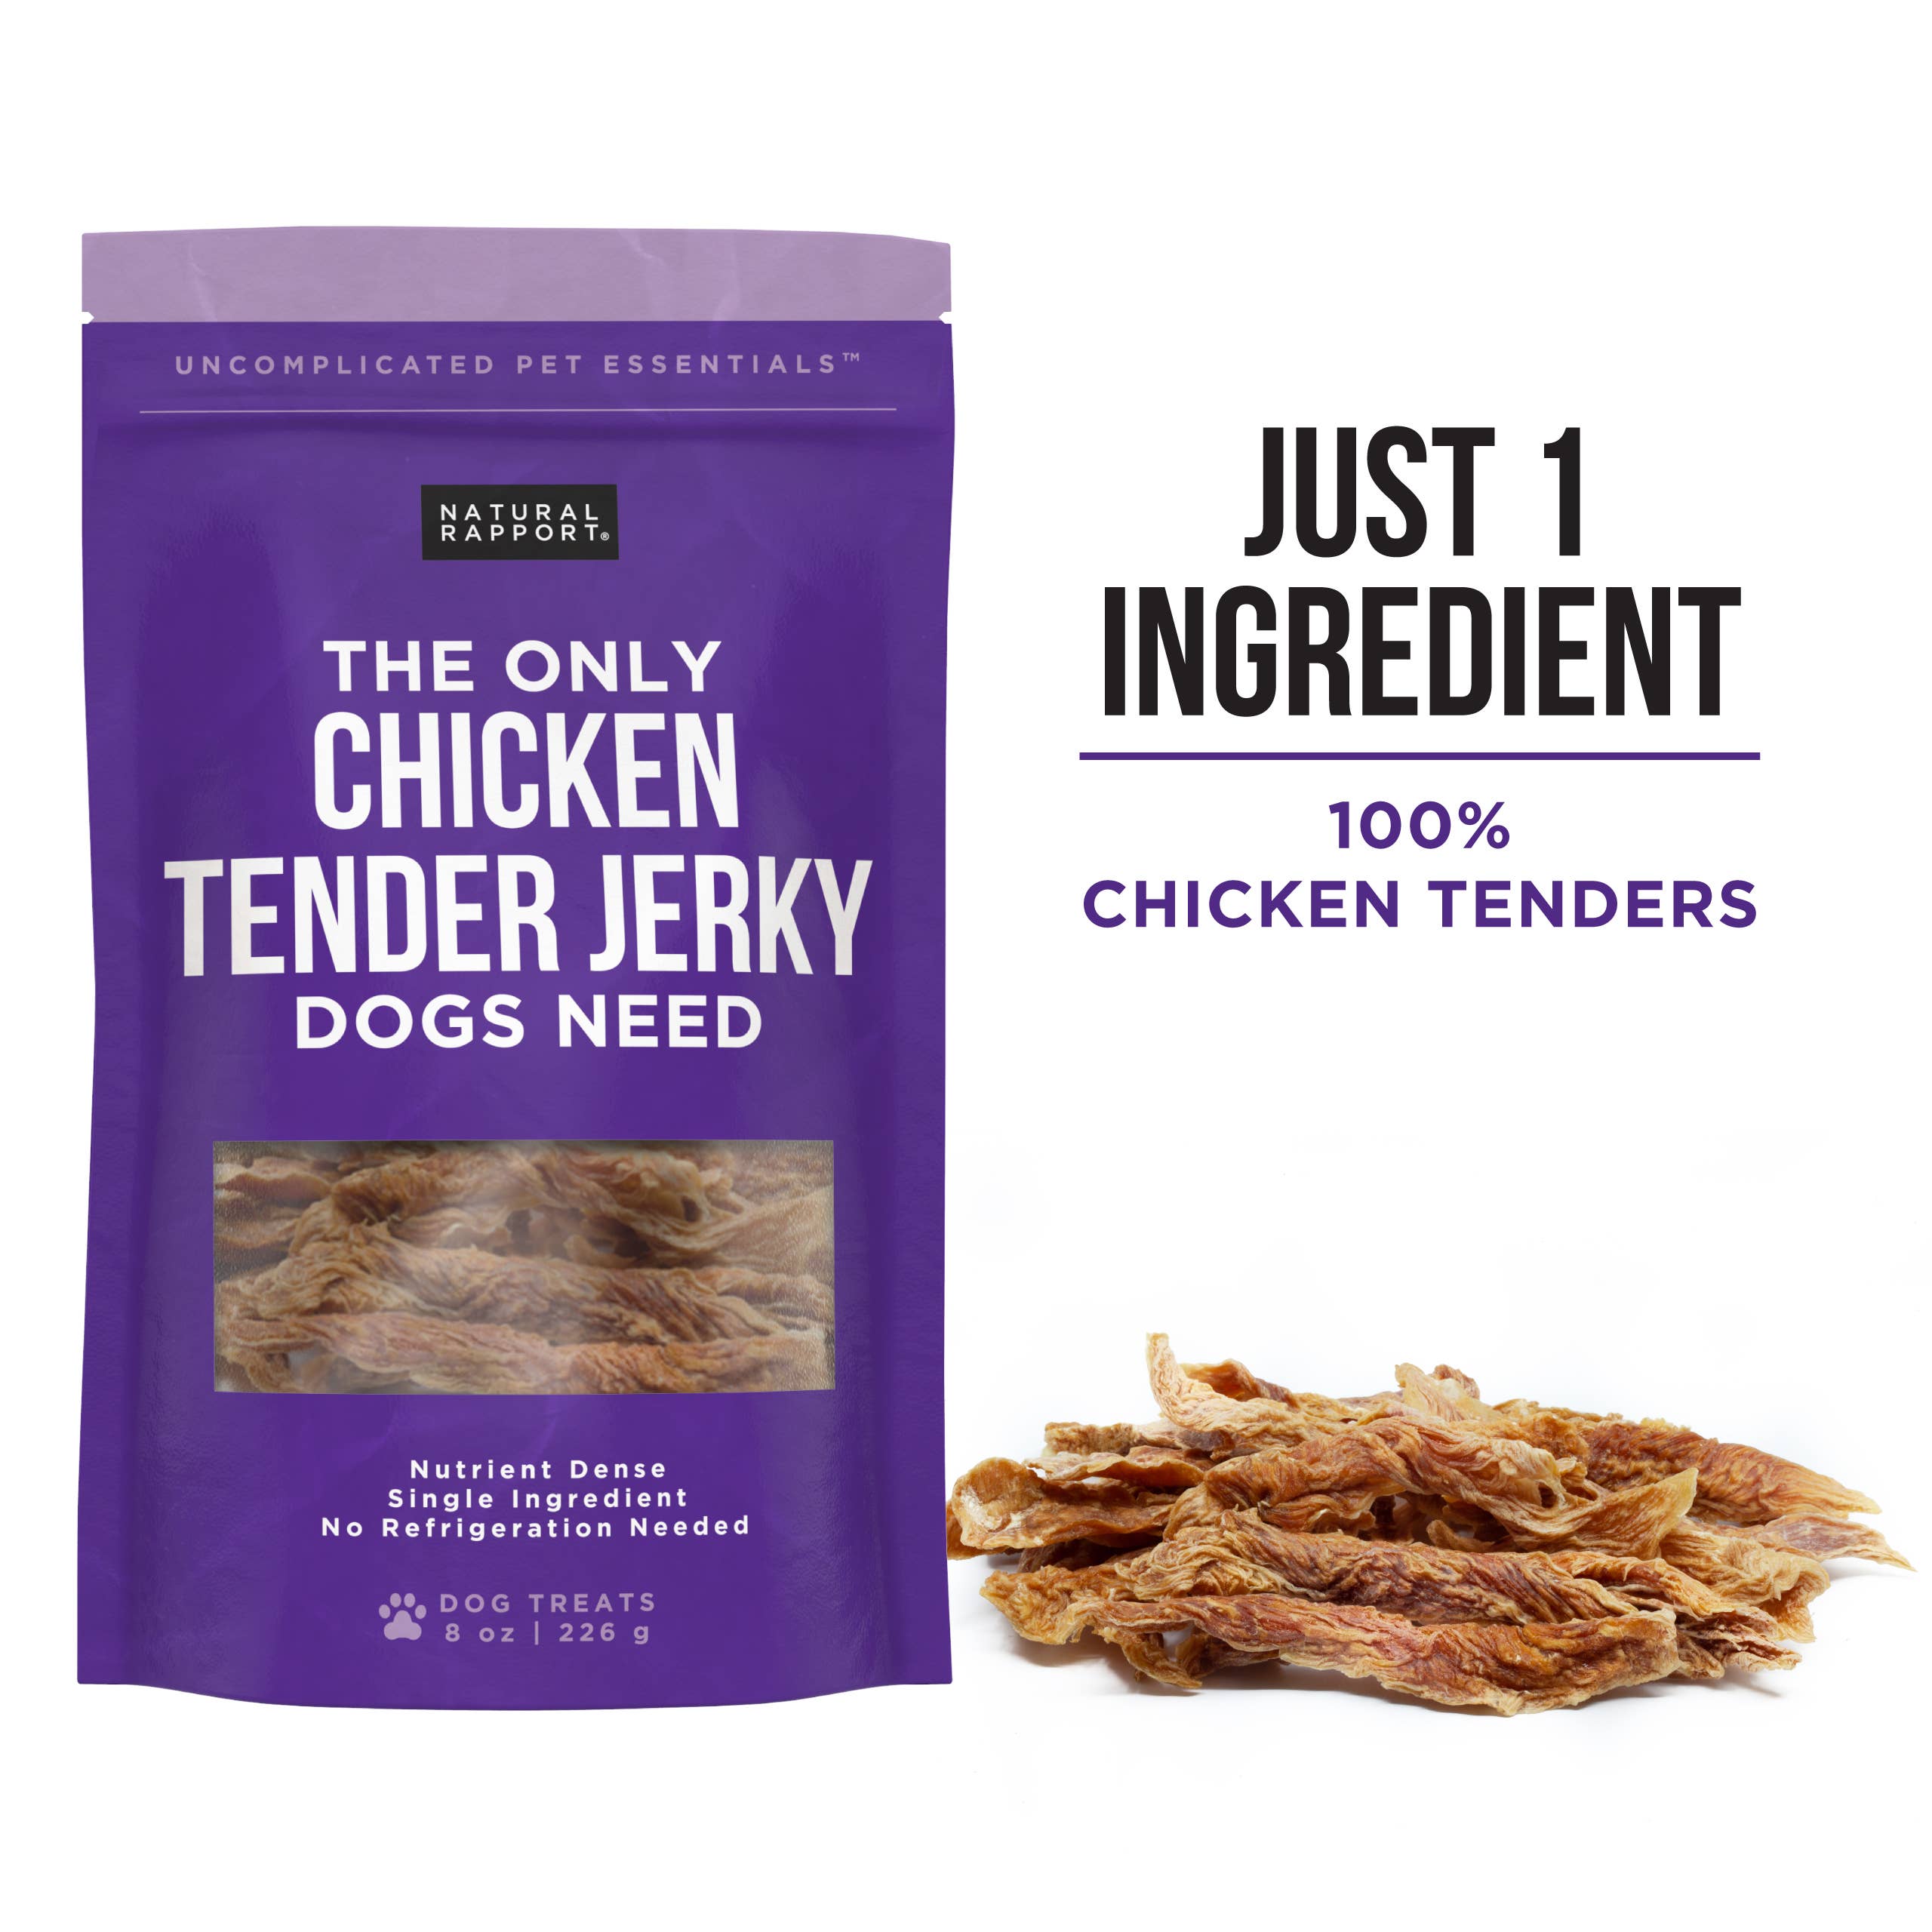 The Only Chicken Tender Jerky Dogs Need: 8 oz bag